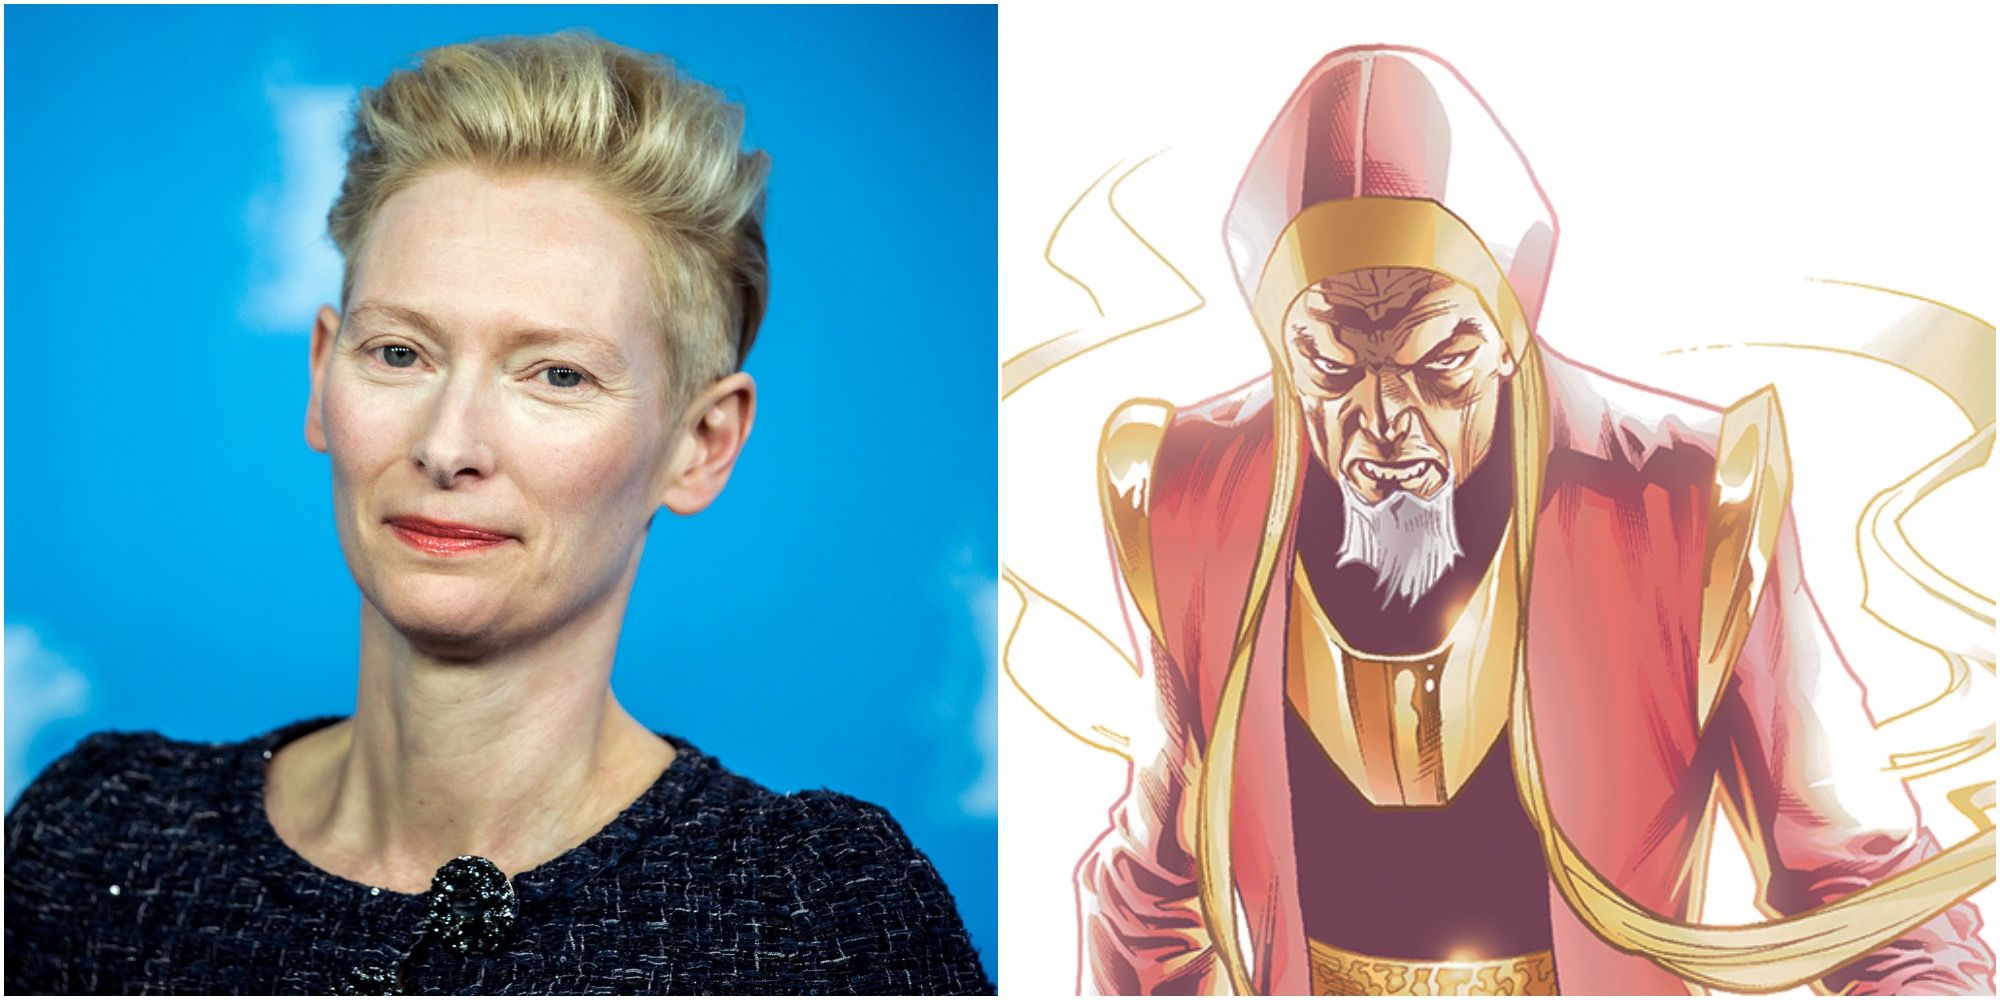 Tilda Swinton and the Ancient One in the comics